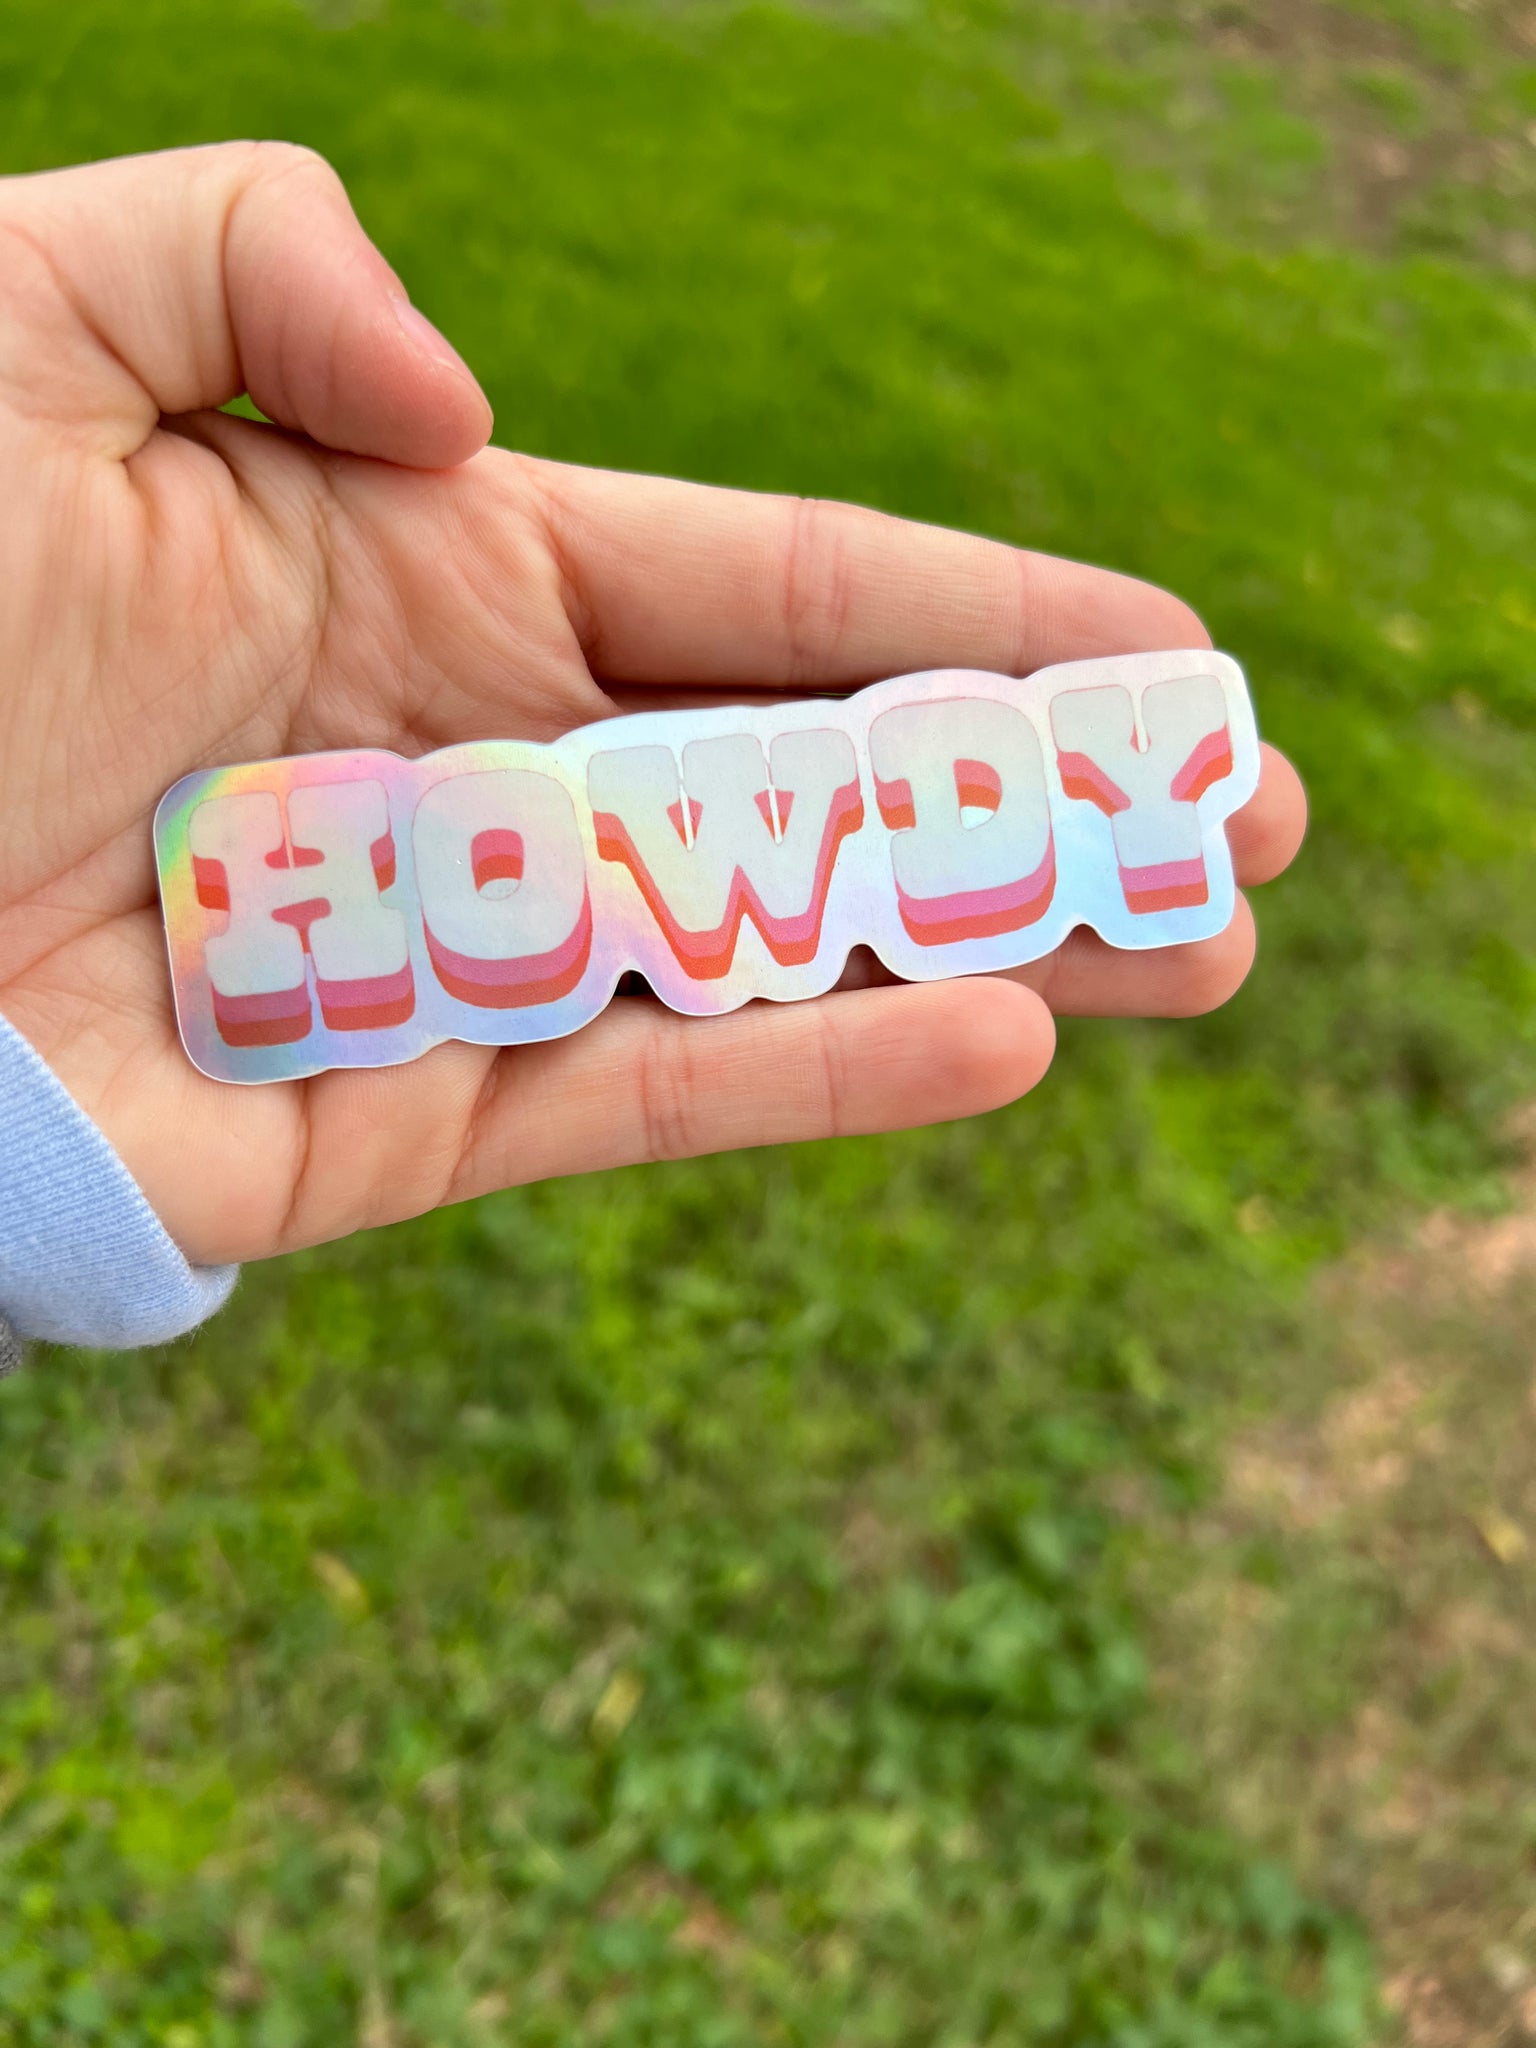 Howdy Holographic Sticker